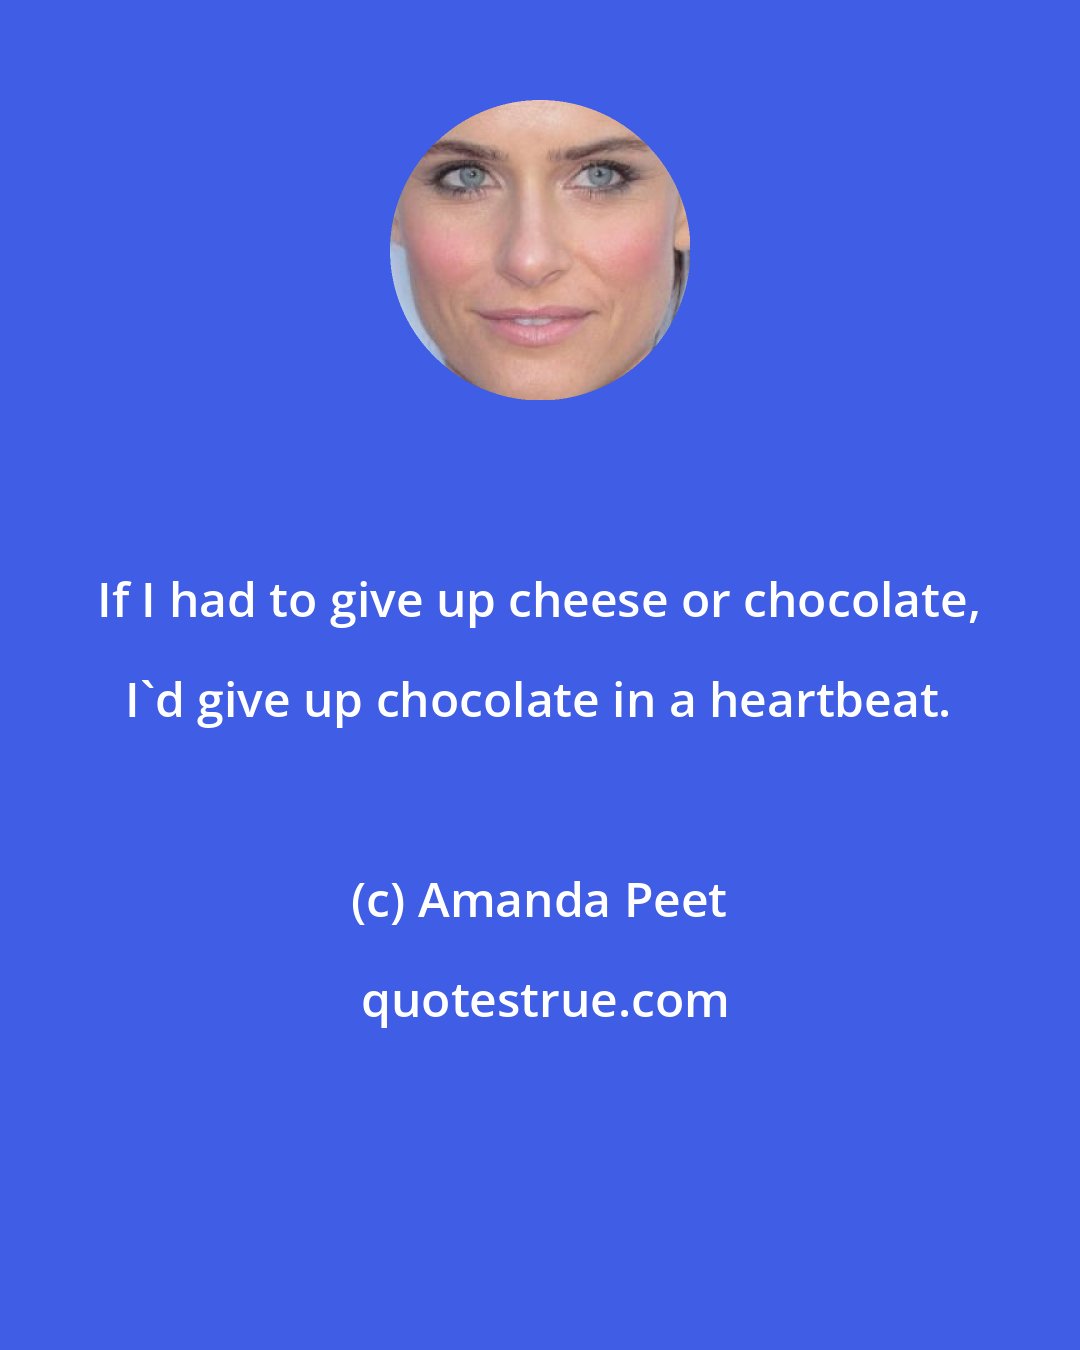 Amanda Peet: If I had to give up cheese or chocolate, I'd give up chocolate in a heartbeat.